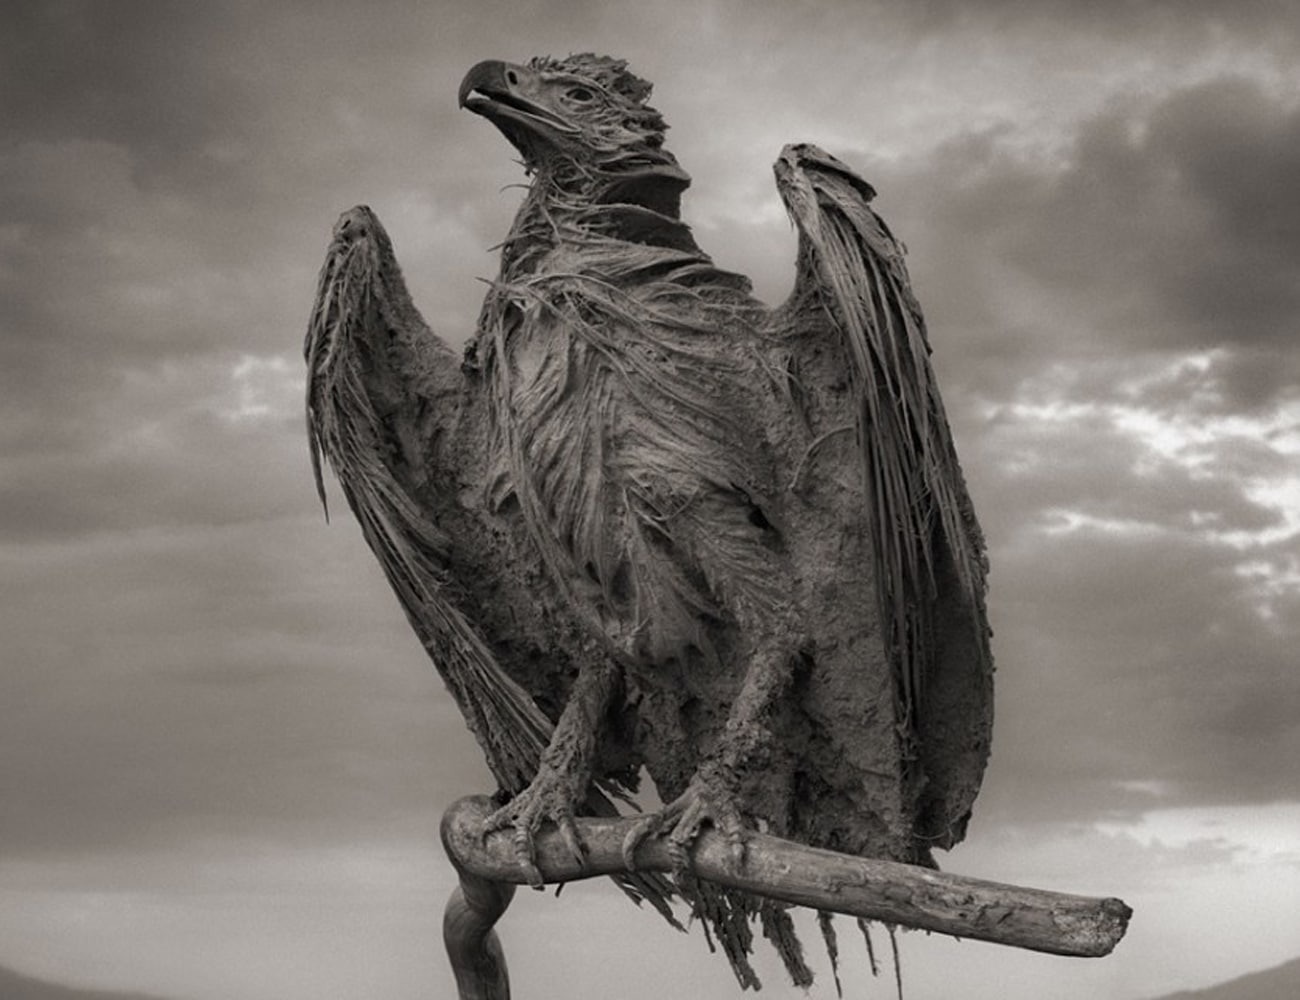 Animals Turned to Statues at Lake Natron